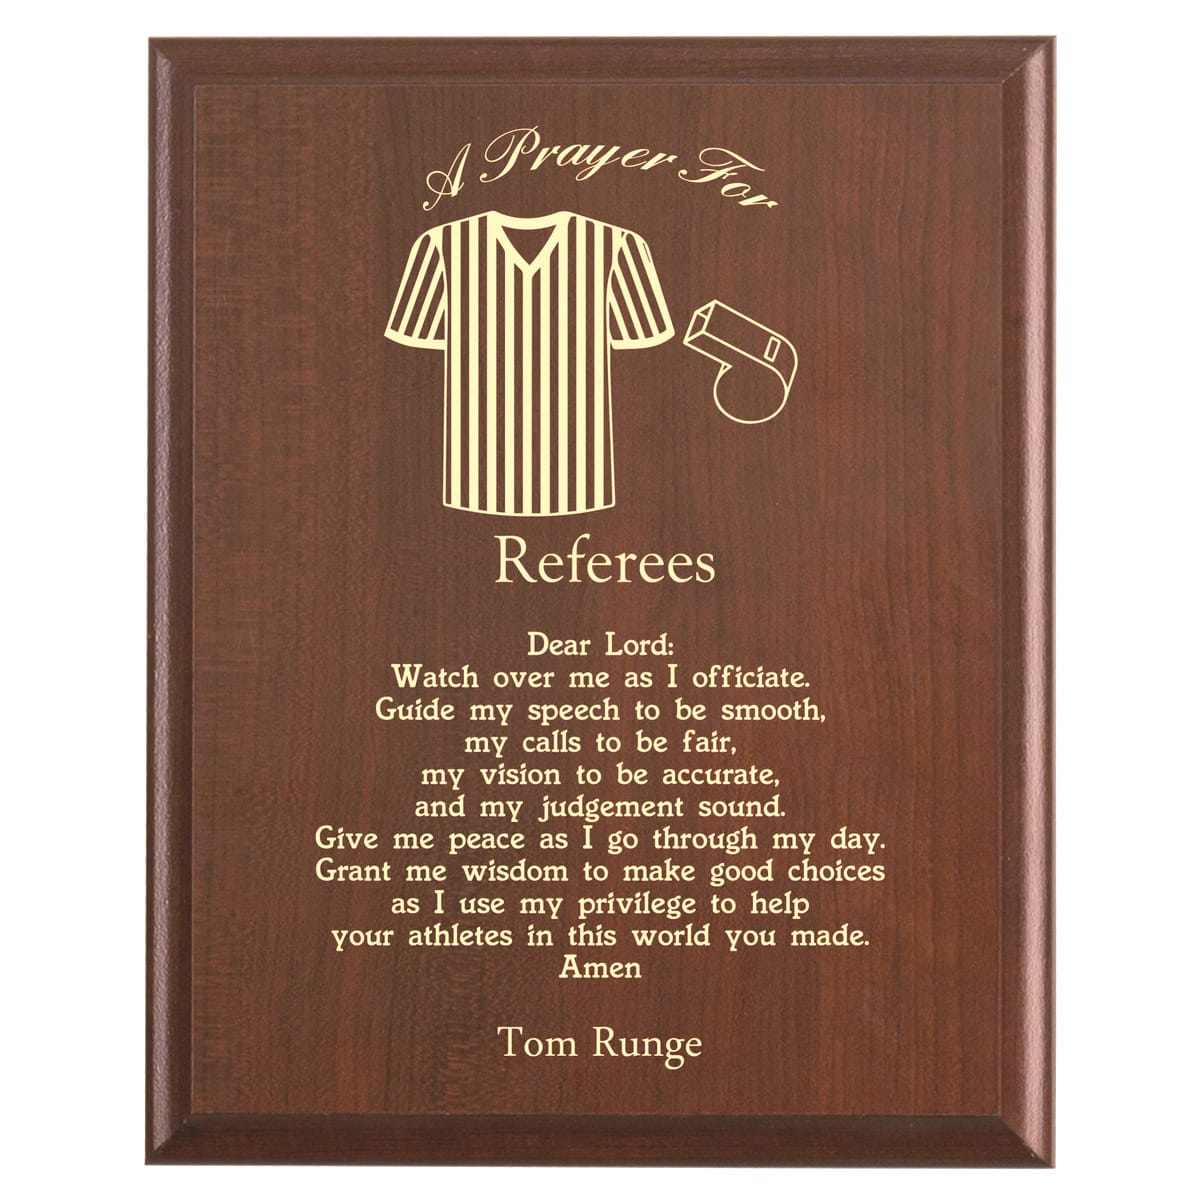 Plaque photo: Referee Prayer Plaque design with free personalization. Wood style finish with customized text.